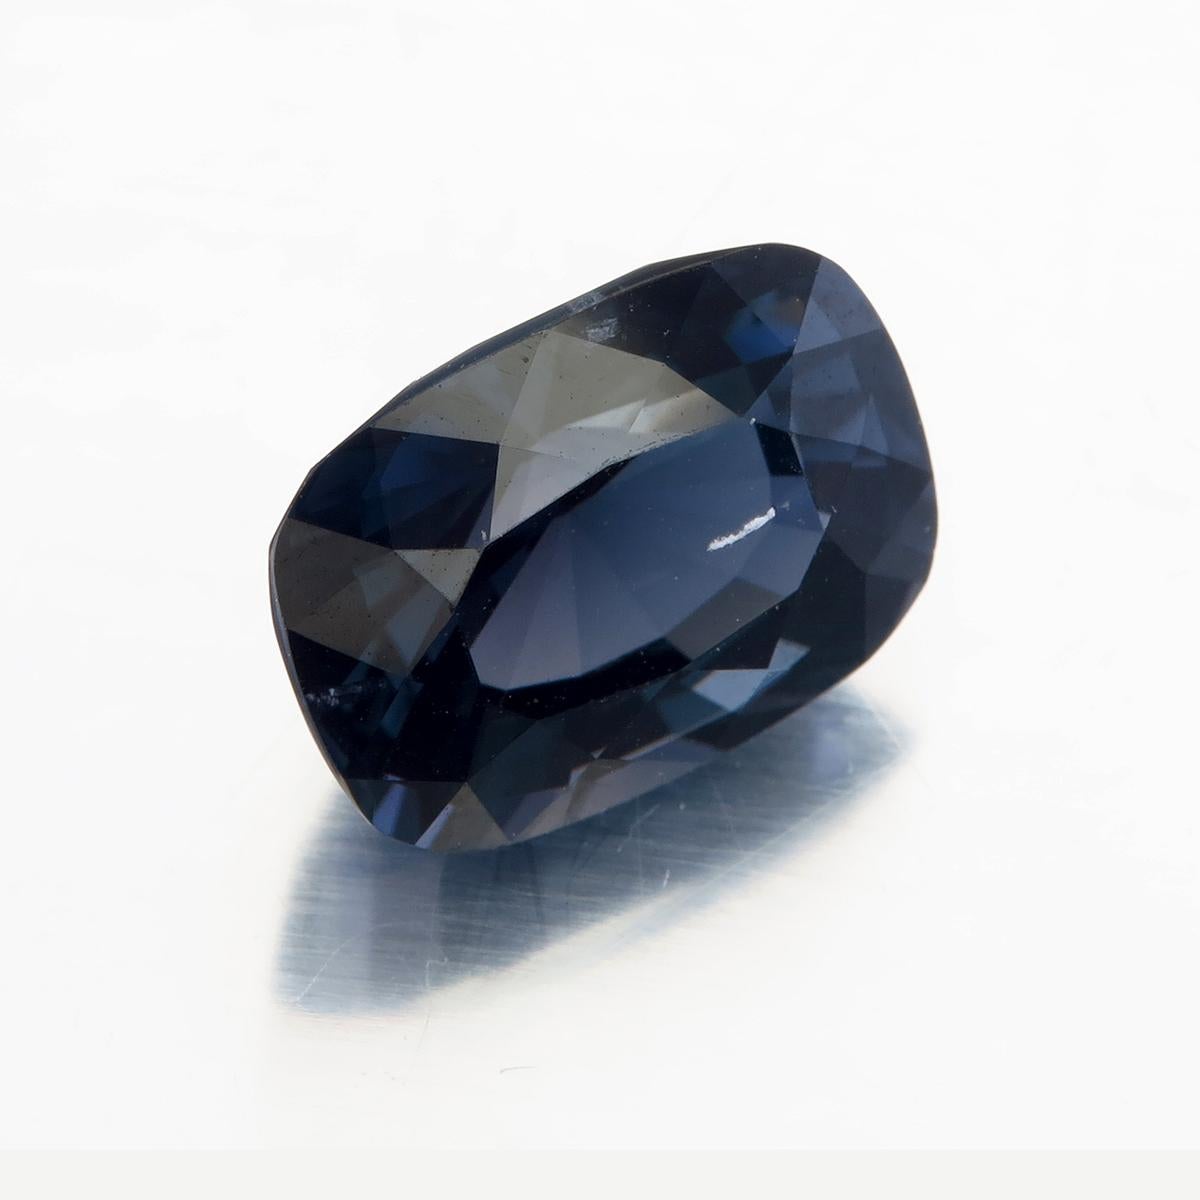 Cushion Cut 3.92 Carat Violet Spinel from Burma 'Myanmar' Lotus Certified For Sale